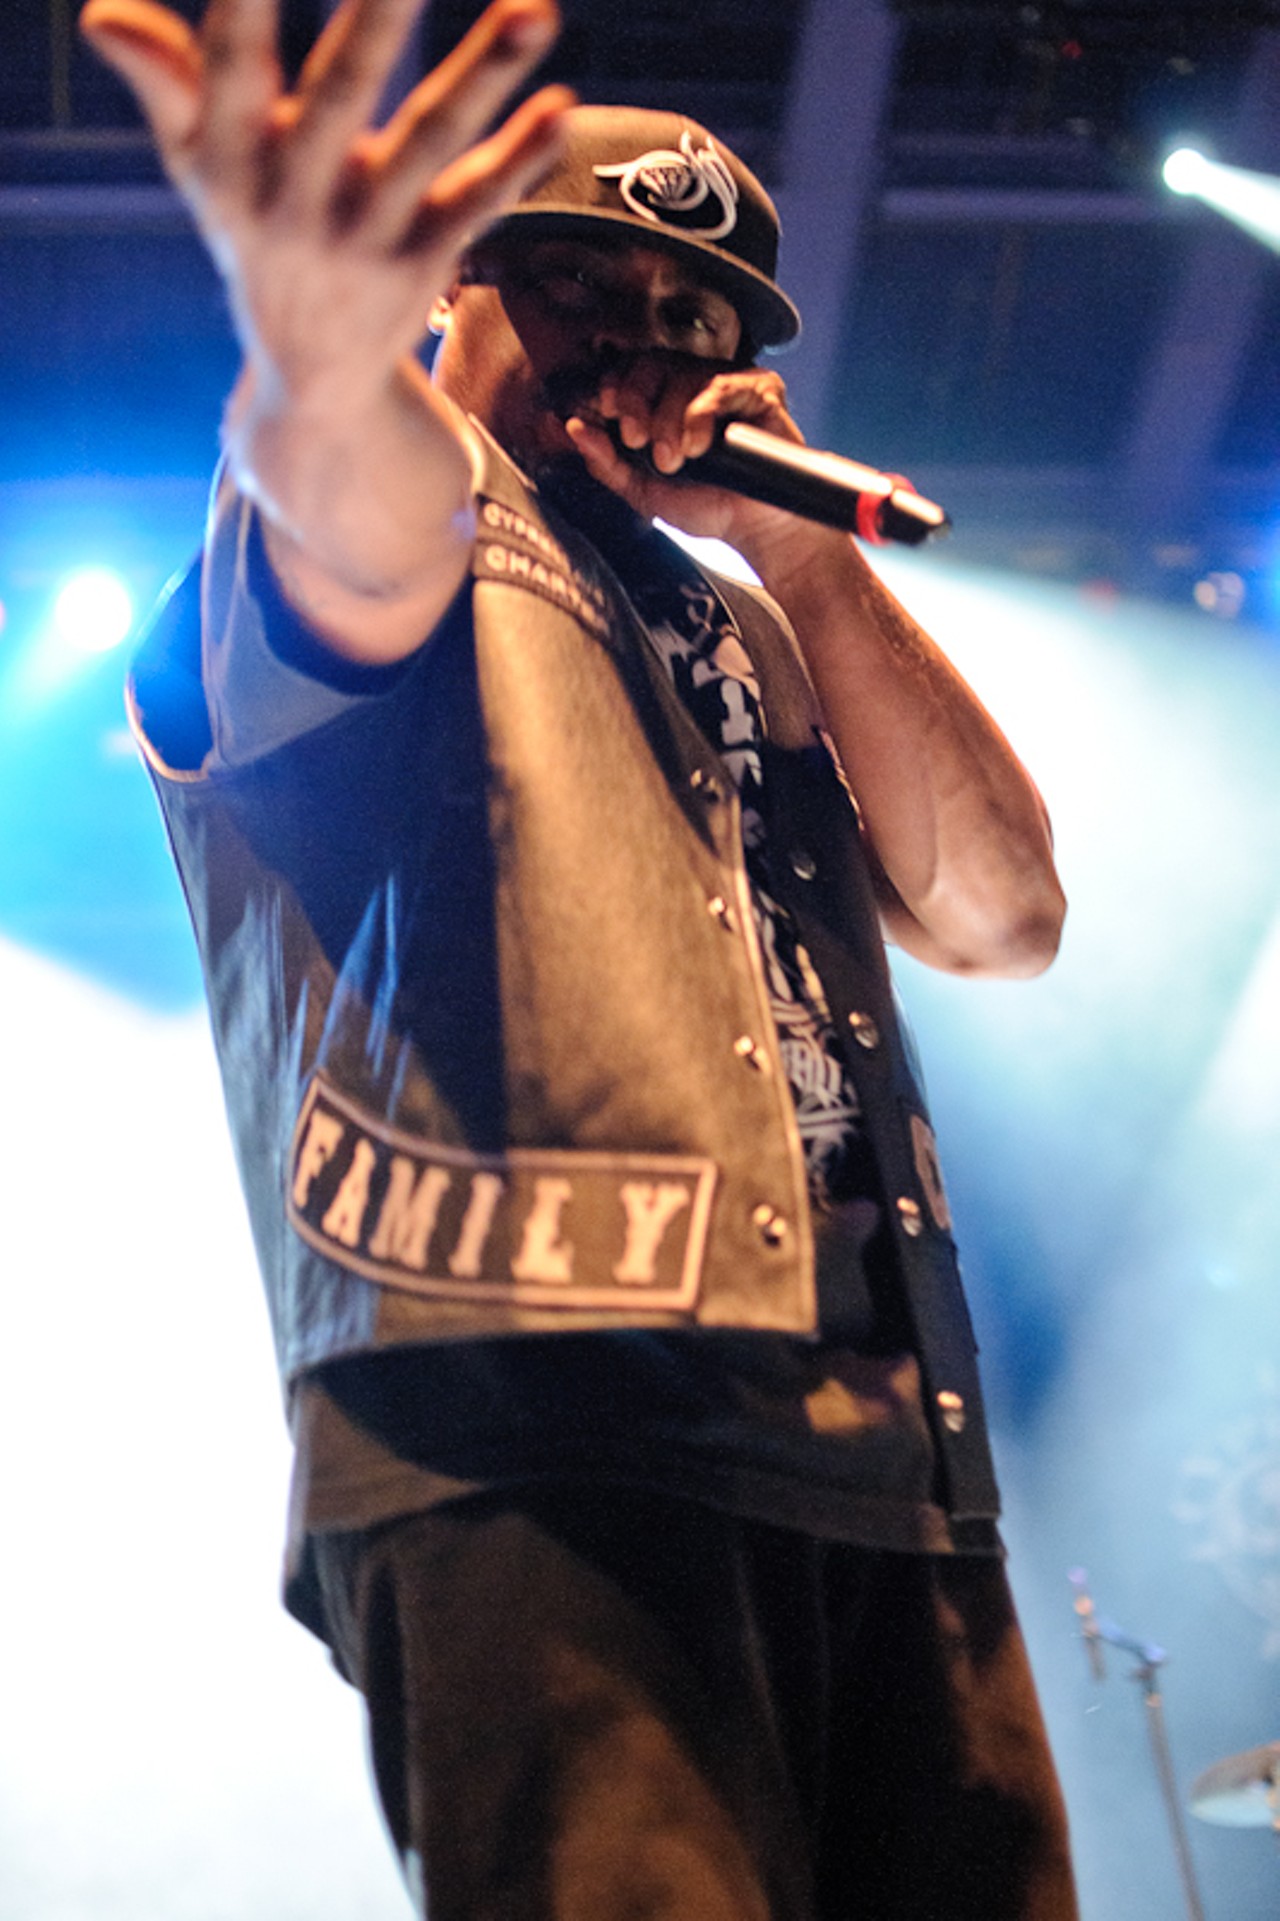 Sen Dog of Cypress Hill, performing at the Pageant.